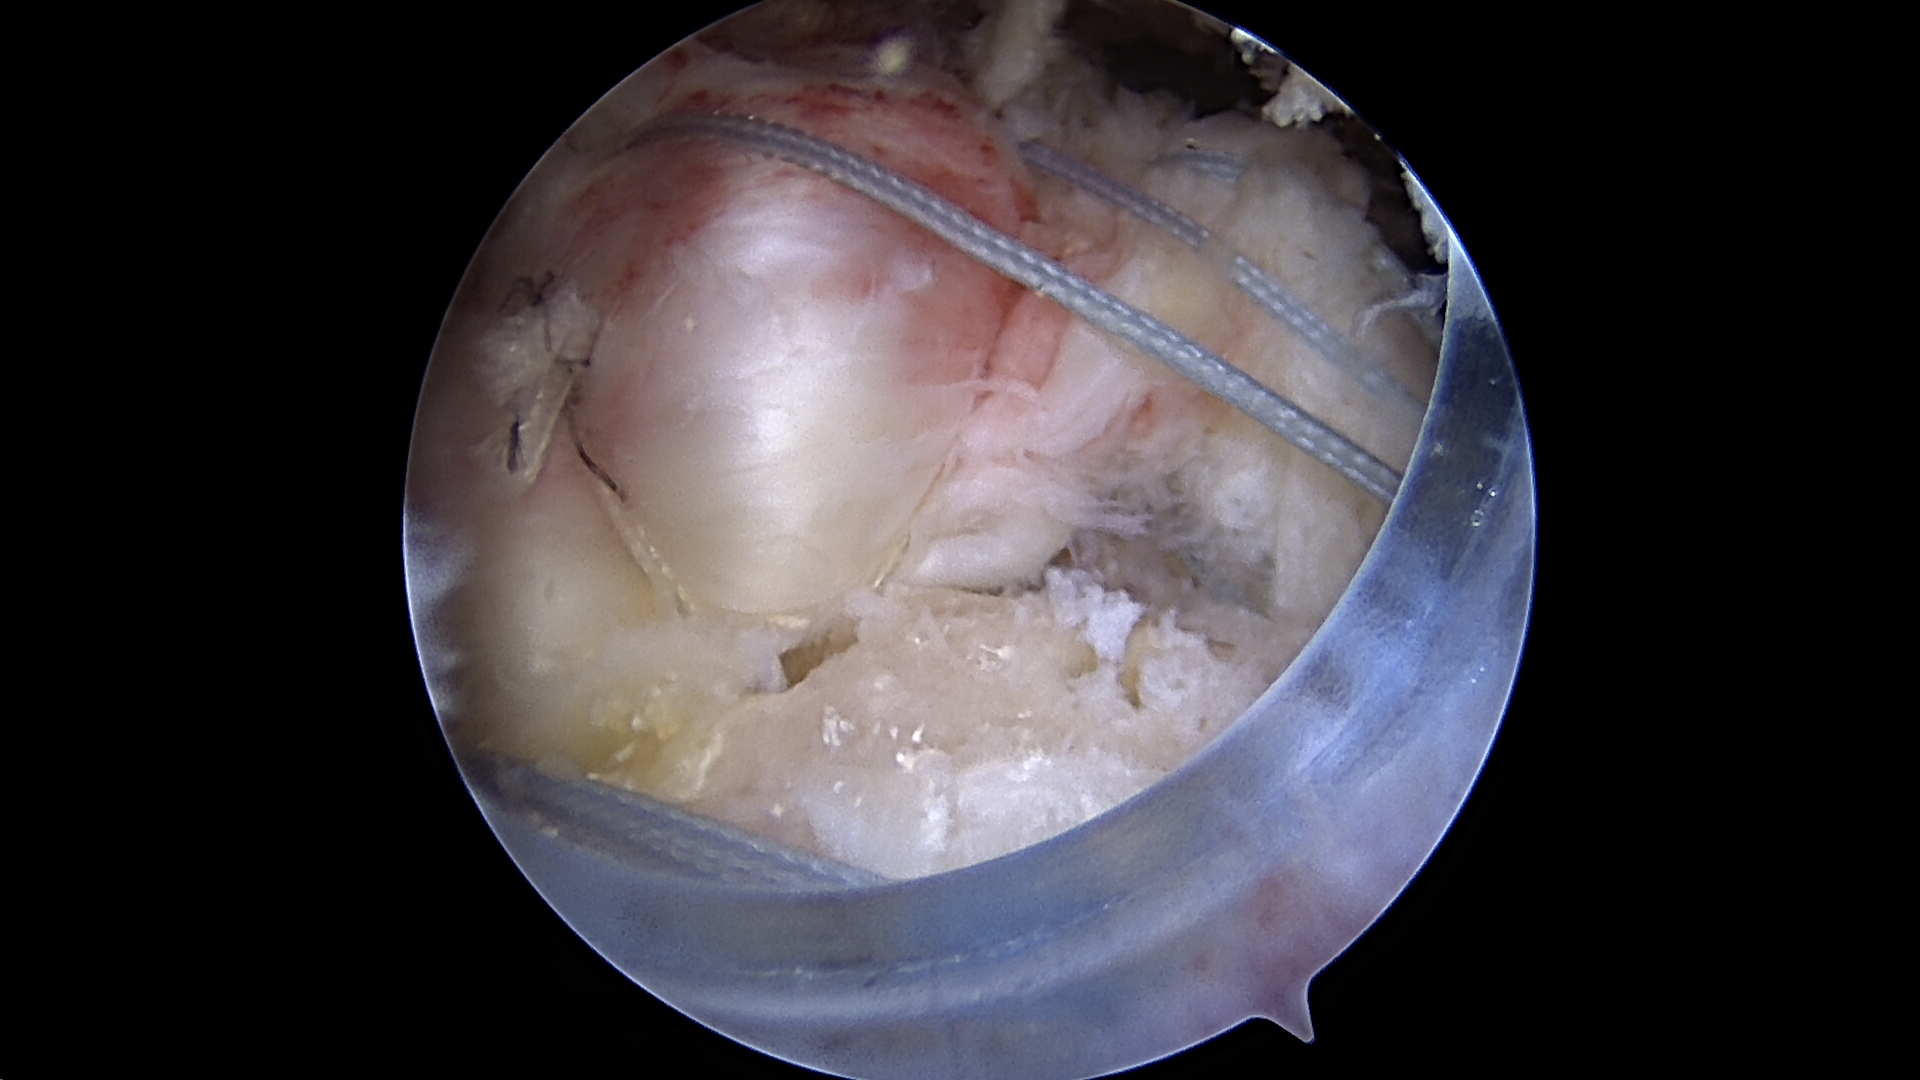 Single row medialized repair of previous massive retracted rotator cuff tear viewed from the lateral portal